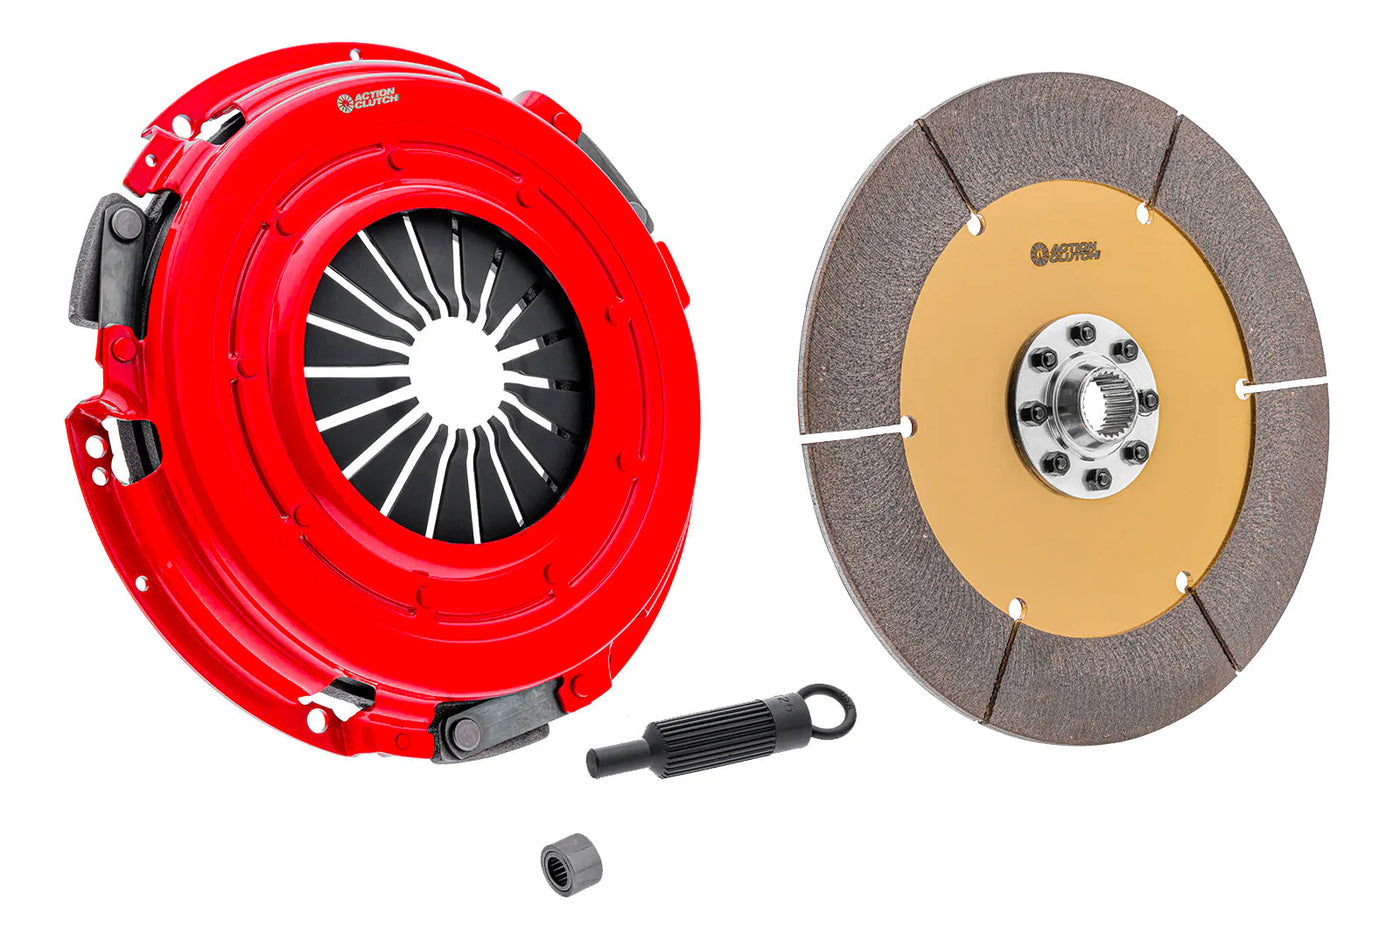 Ironman Unsprung Clutch Kit for Chevrolet Corvette 1997-2004 5.7L (LS1) Without Slave and Release Bearing